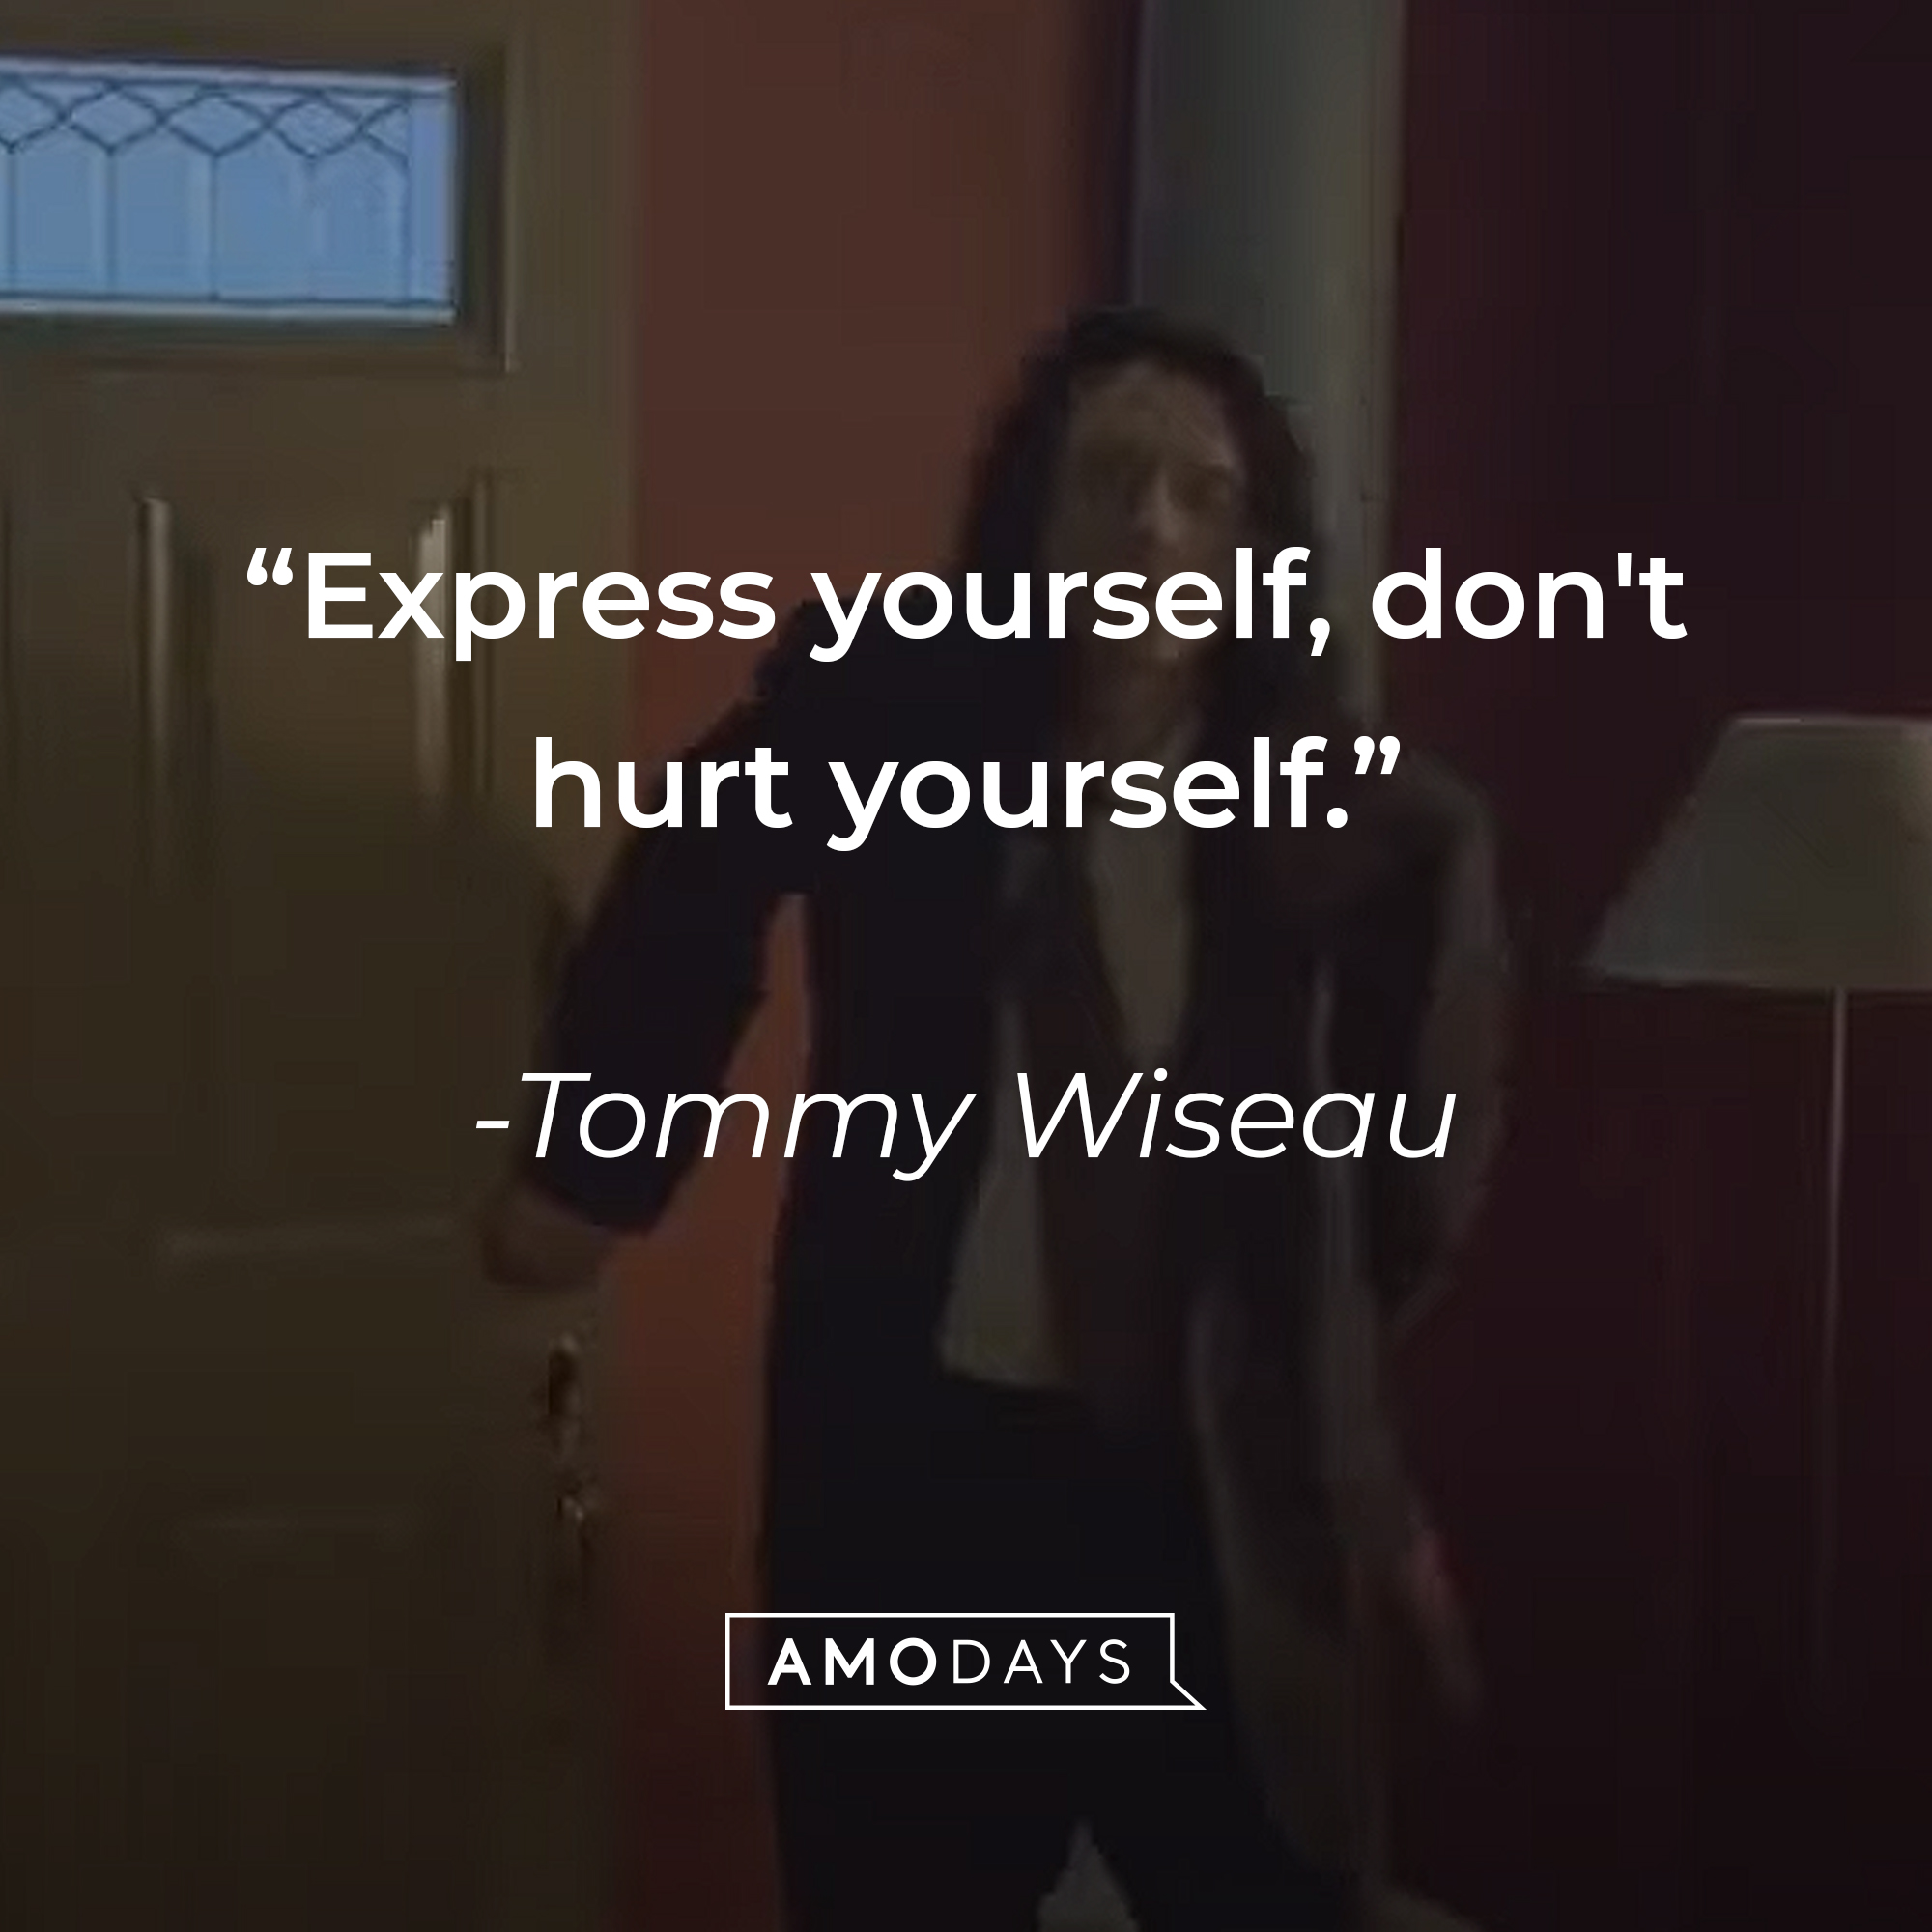 A photo of from "The Room" with the quote, "Express yourself, don't hurt yourself." | Source: YouTube/TommyWiseau